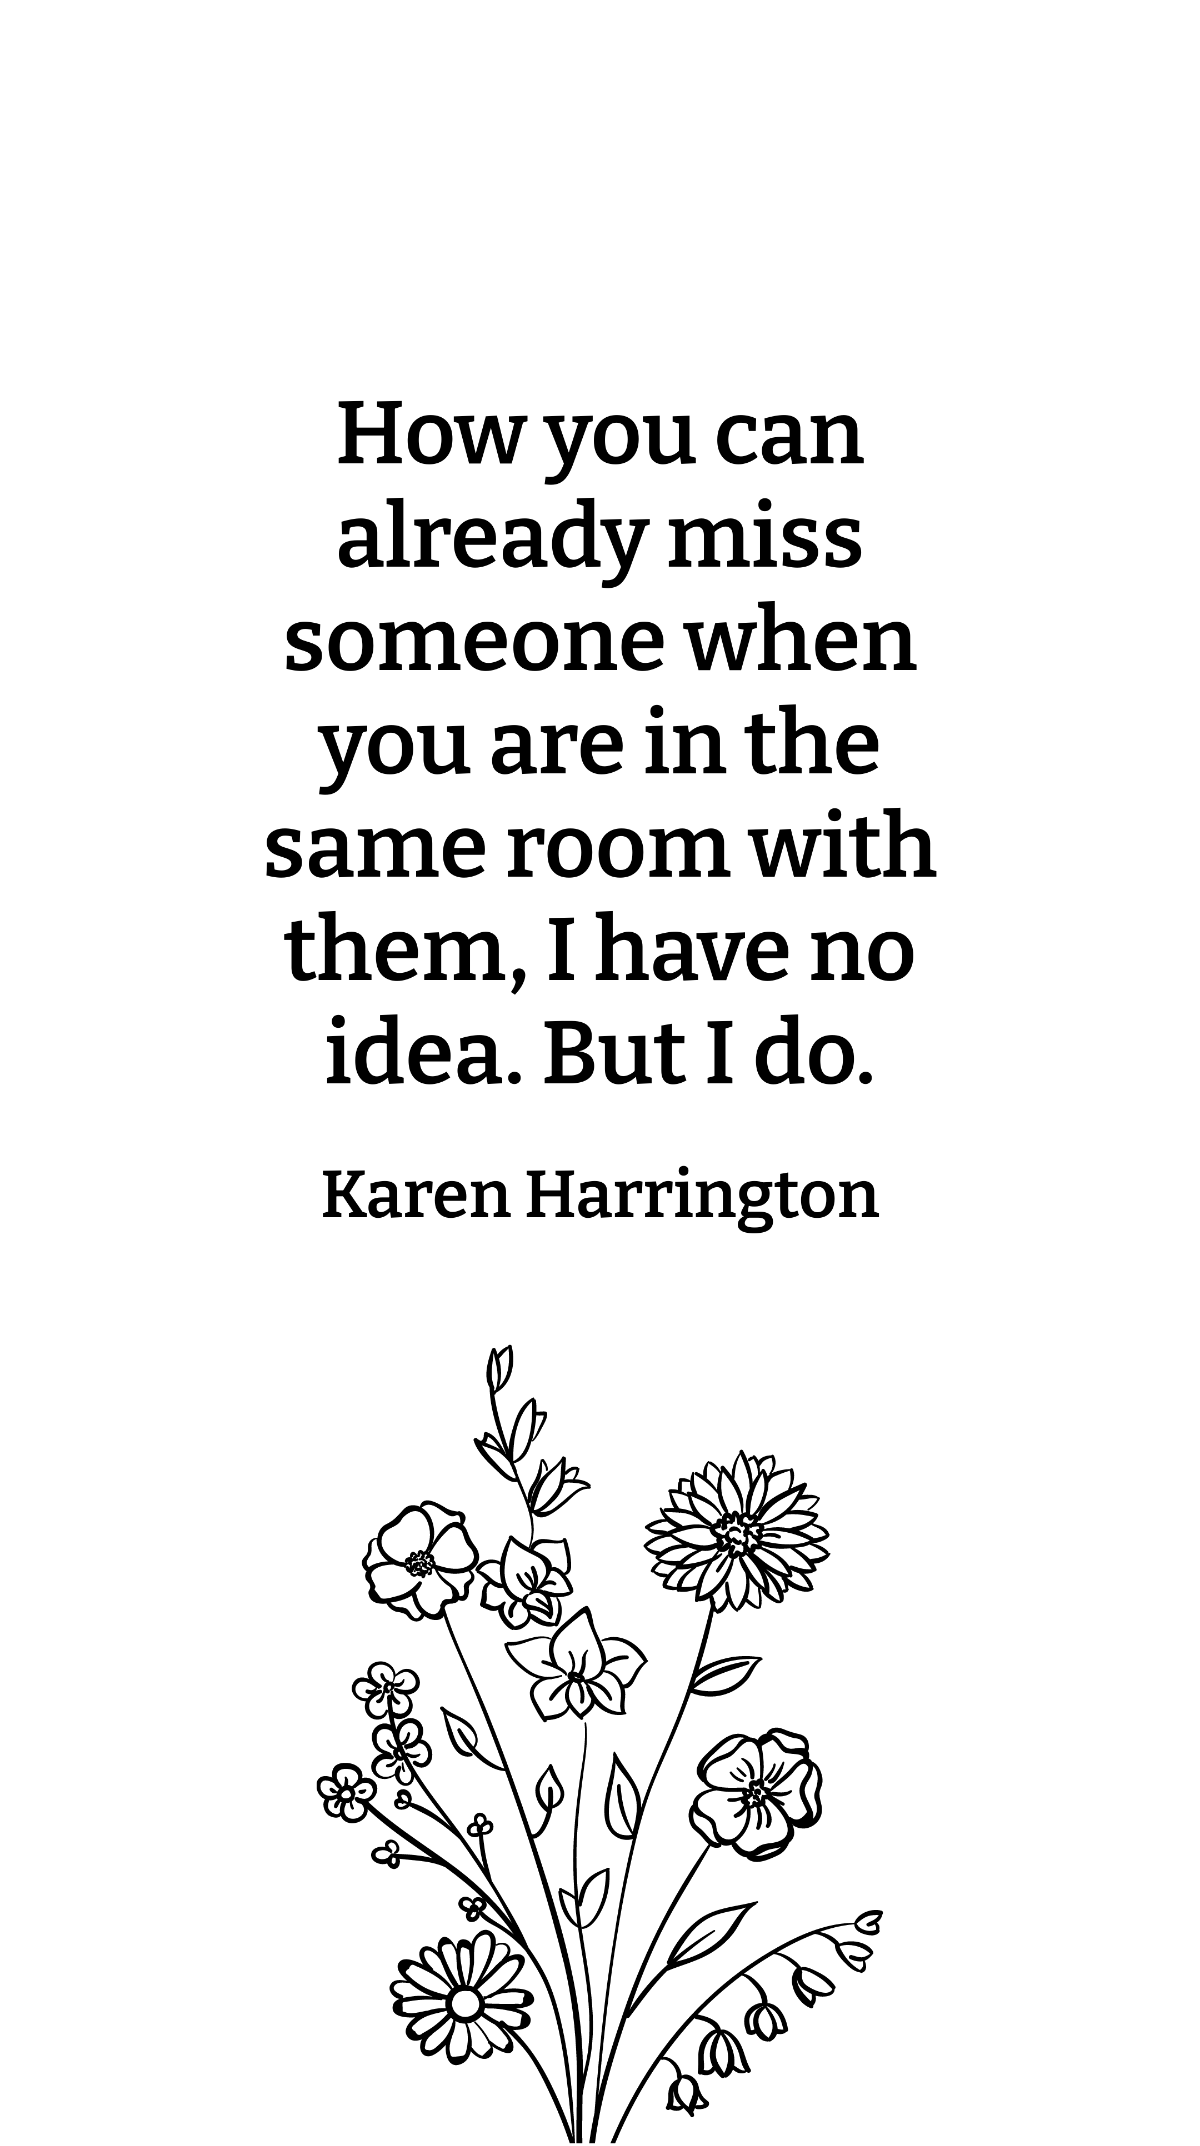 Karen Harrington - How you can already miss someone when you are in the same room with them, I have no idea. But I do. Template